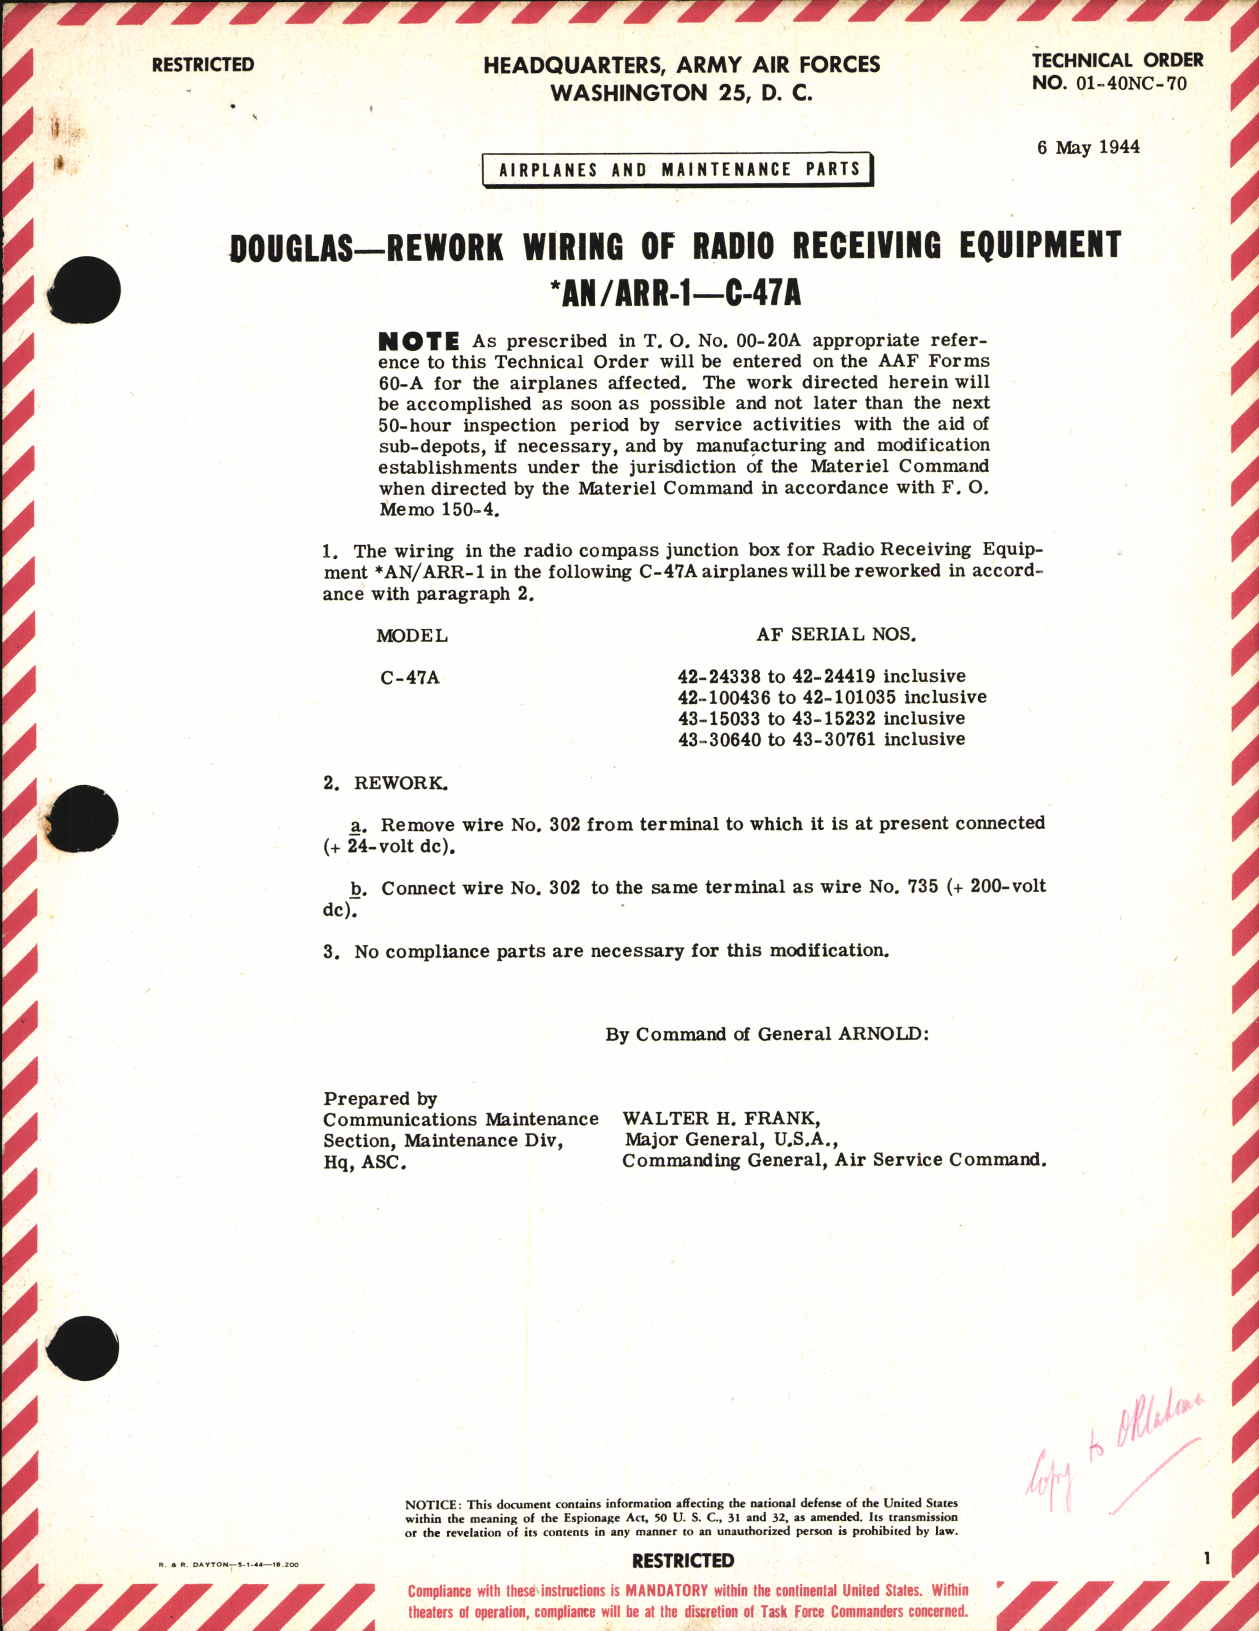 Sample page 1 from AirCorps Library document: Rework of Wiring of Radio Receiving Equipment AN/ARR-1 for C-47A